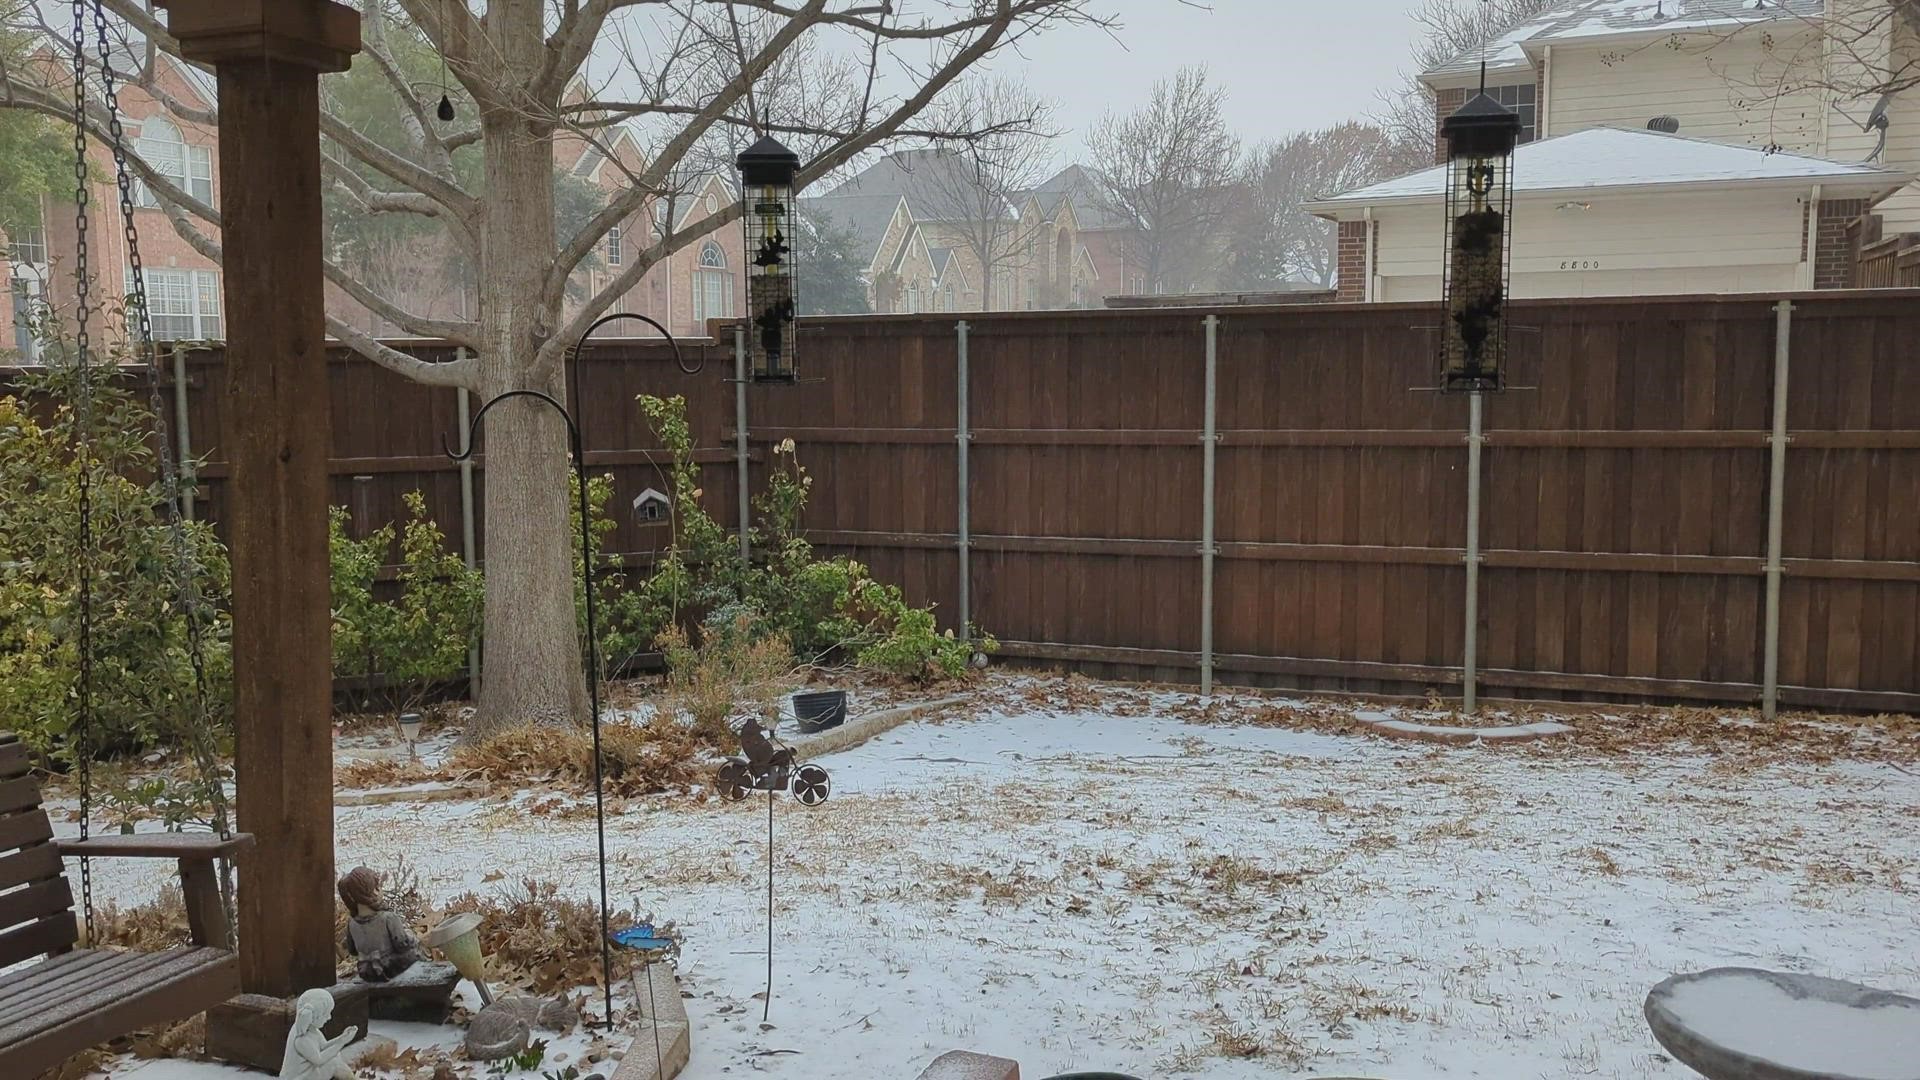 Video of how the sleet sounded and looked while it fell in our area.
Credit: Kathy Clark